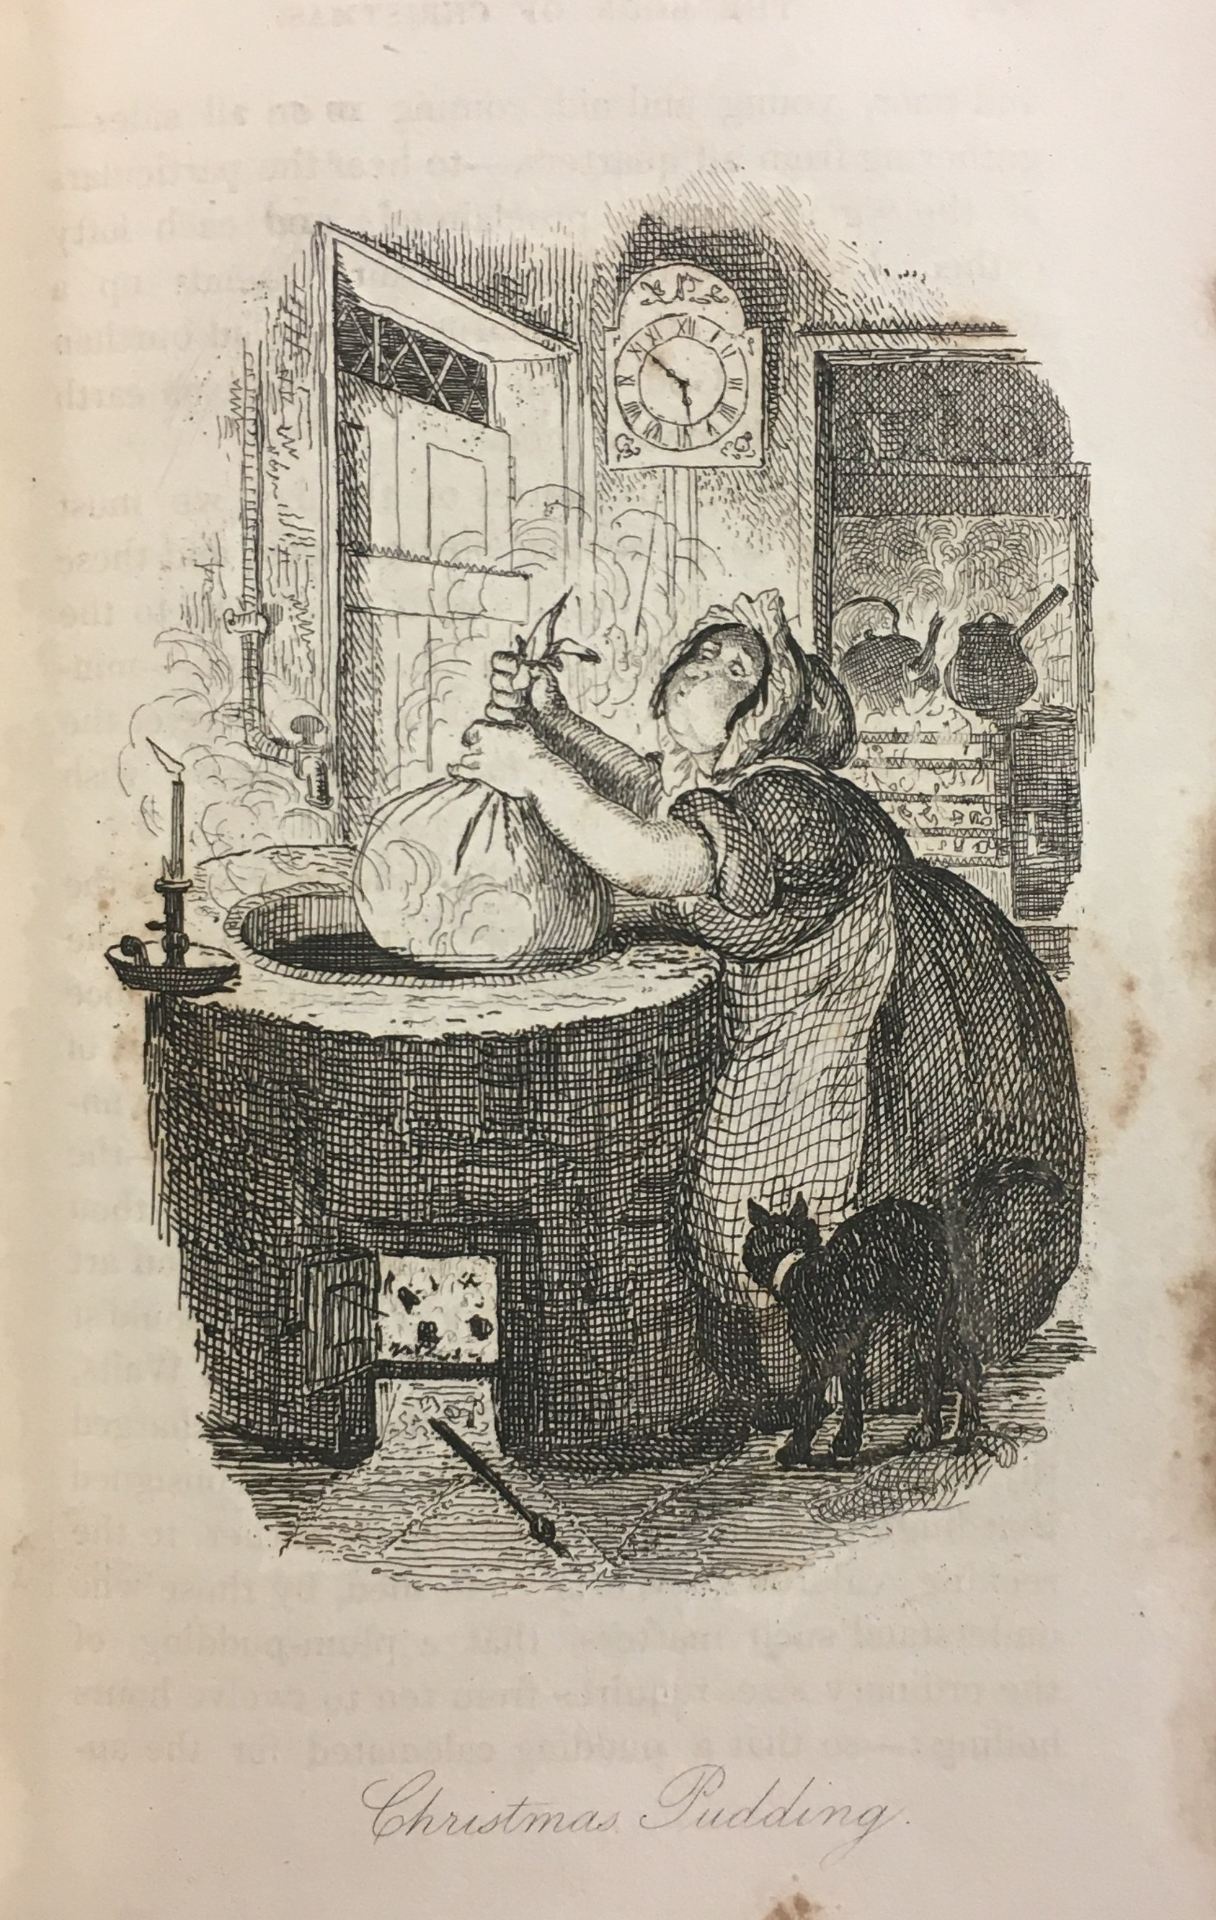 ‘Christmas Pudding’. An illustration by Robert Seymour from ‘The Book of Christmas’ by Thomas Hervey (1836).